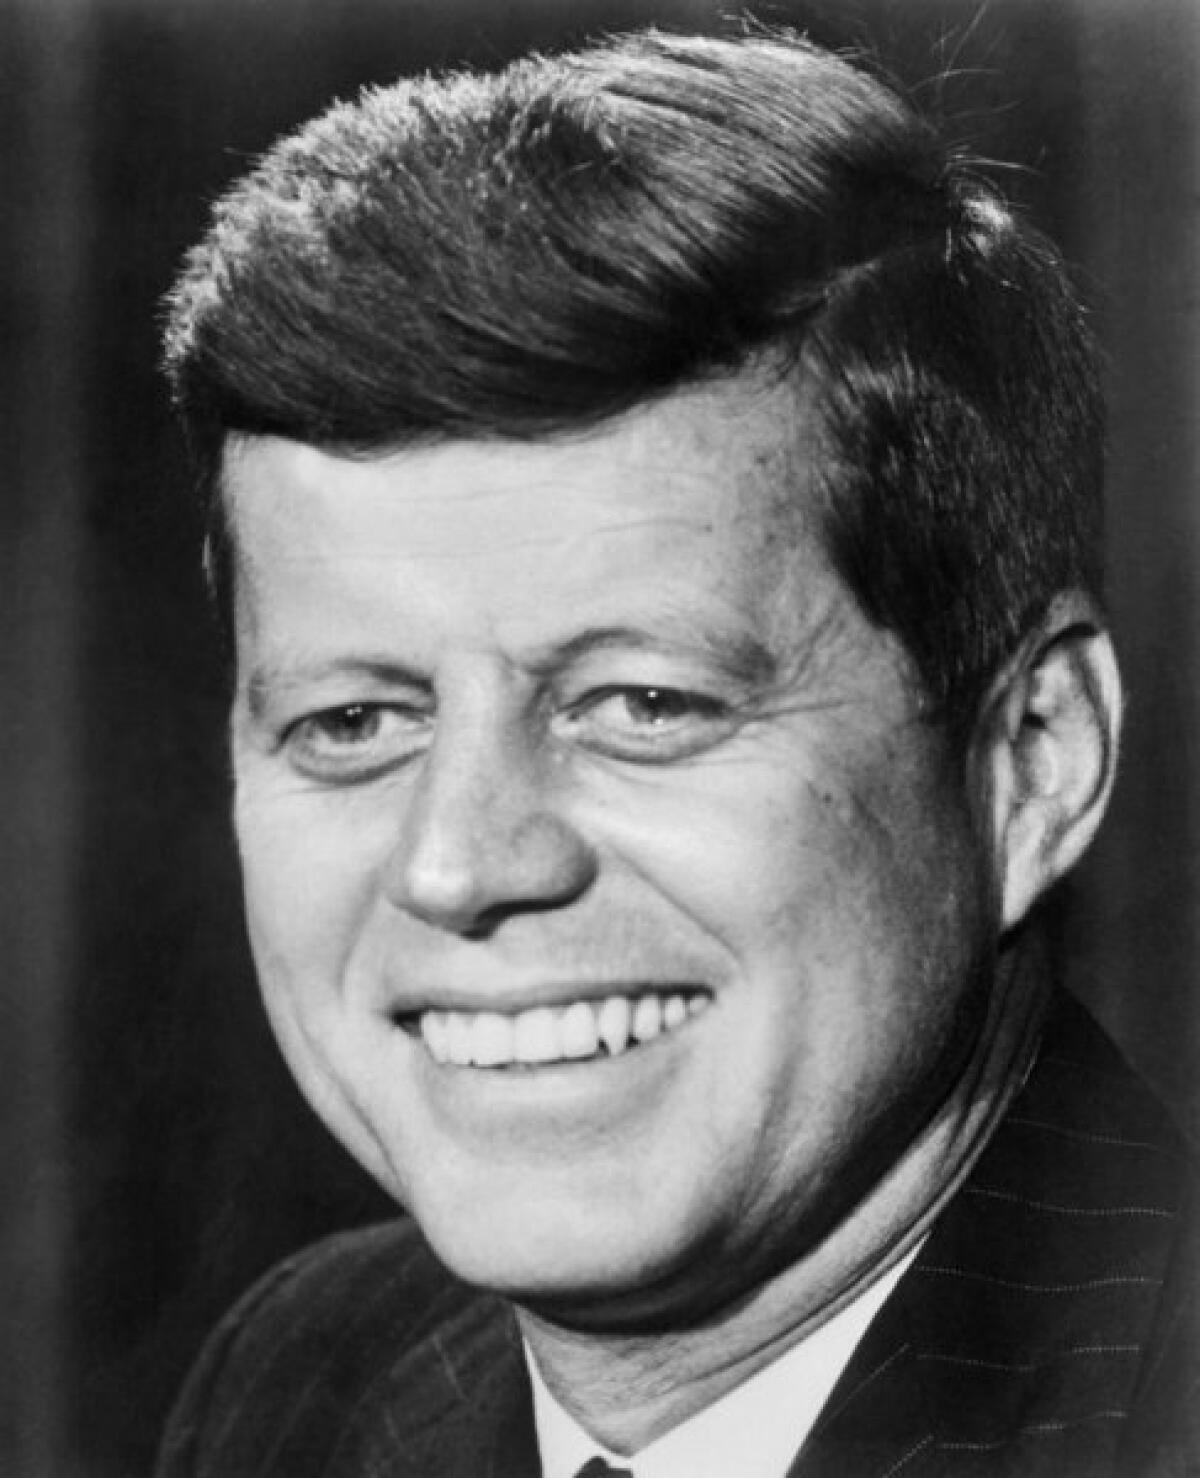 Friday marks the 50th anniversary of John F. Kennedy's assassination at Dealey Plaza in Dallas.